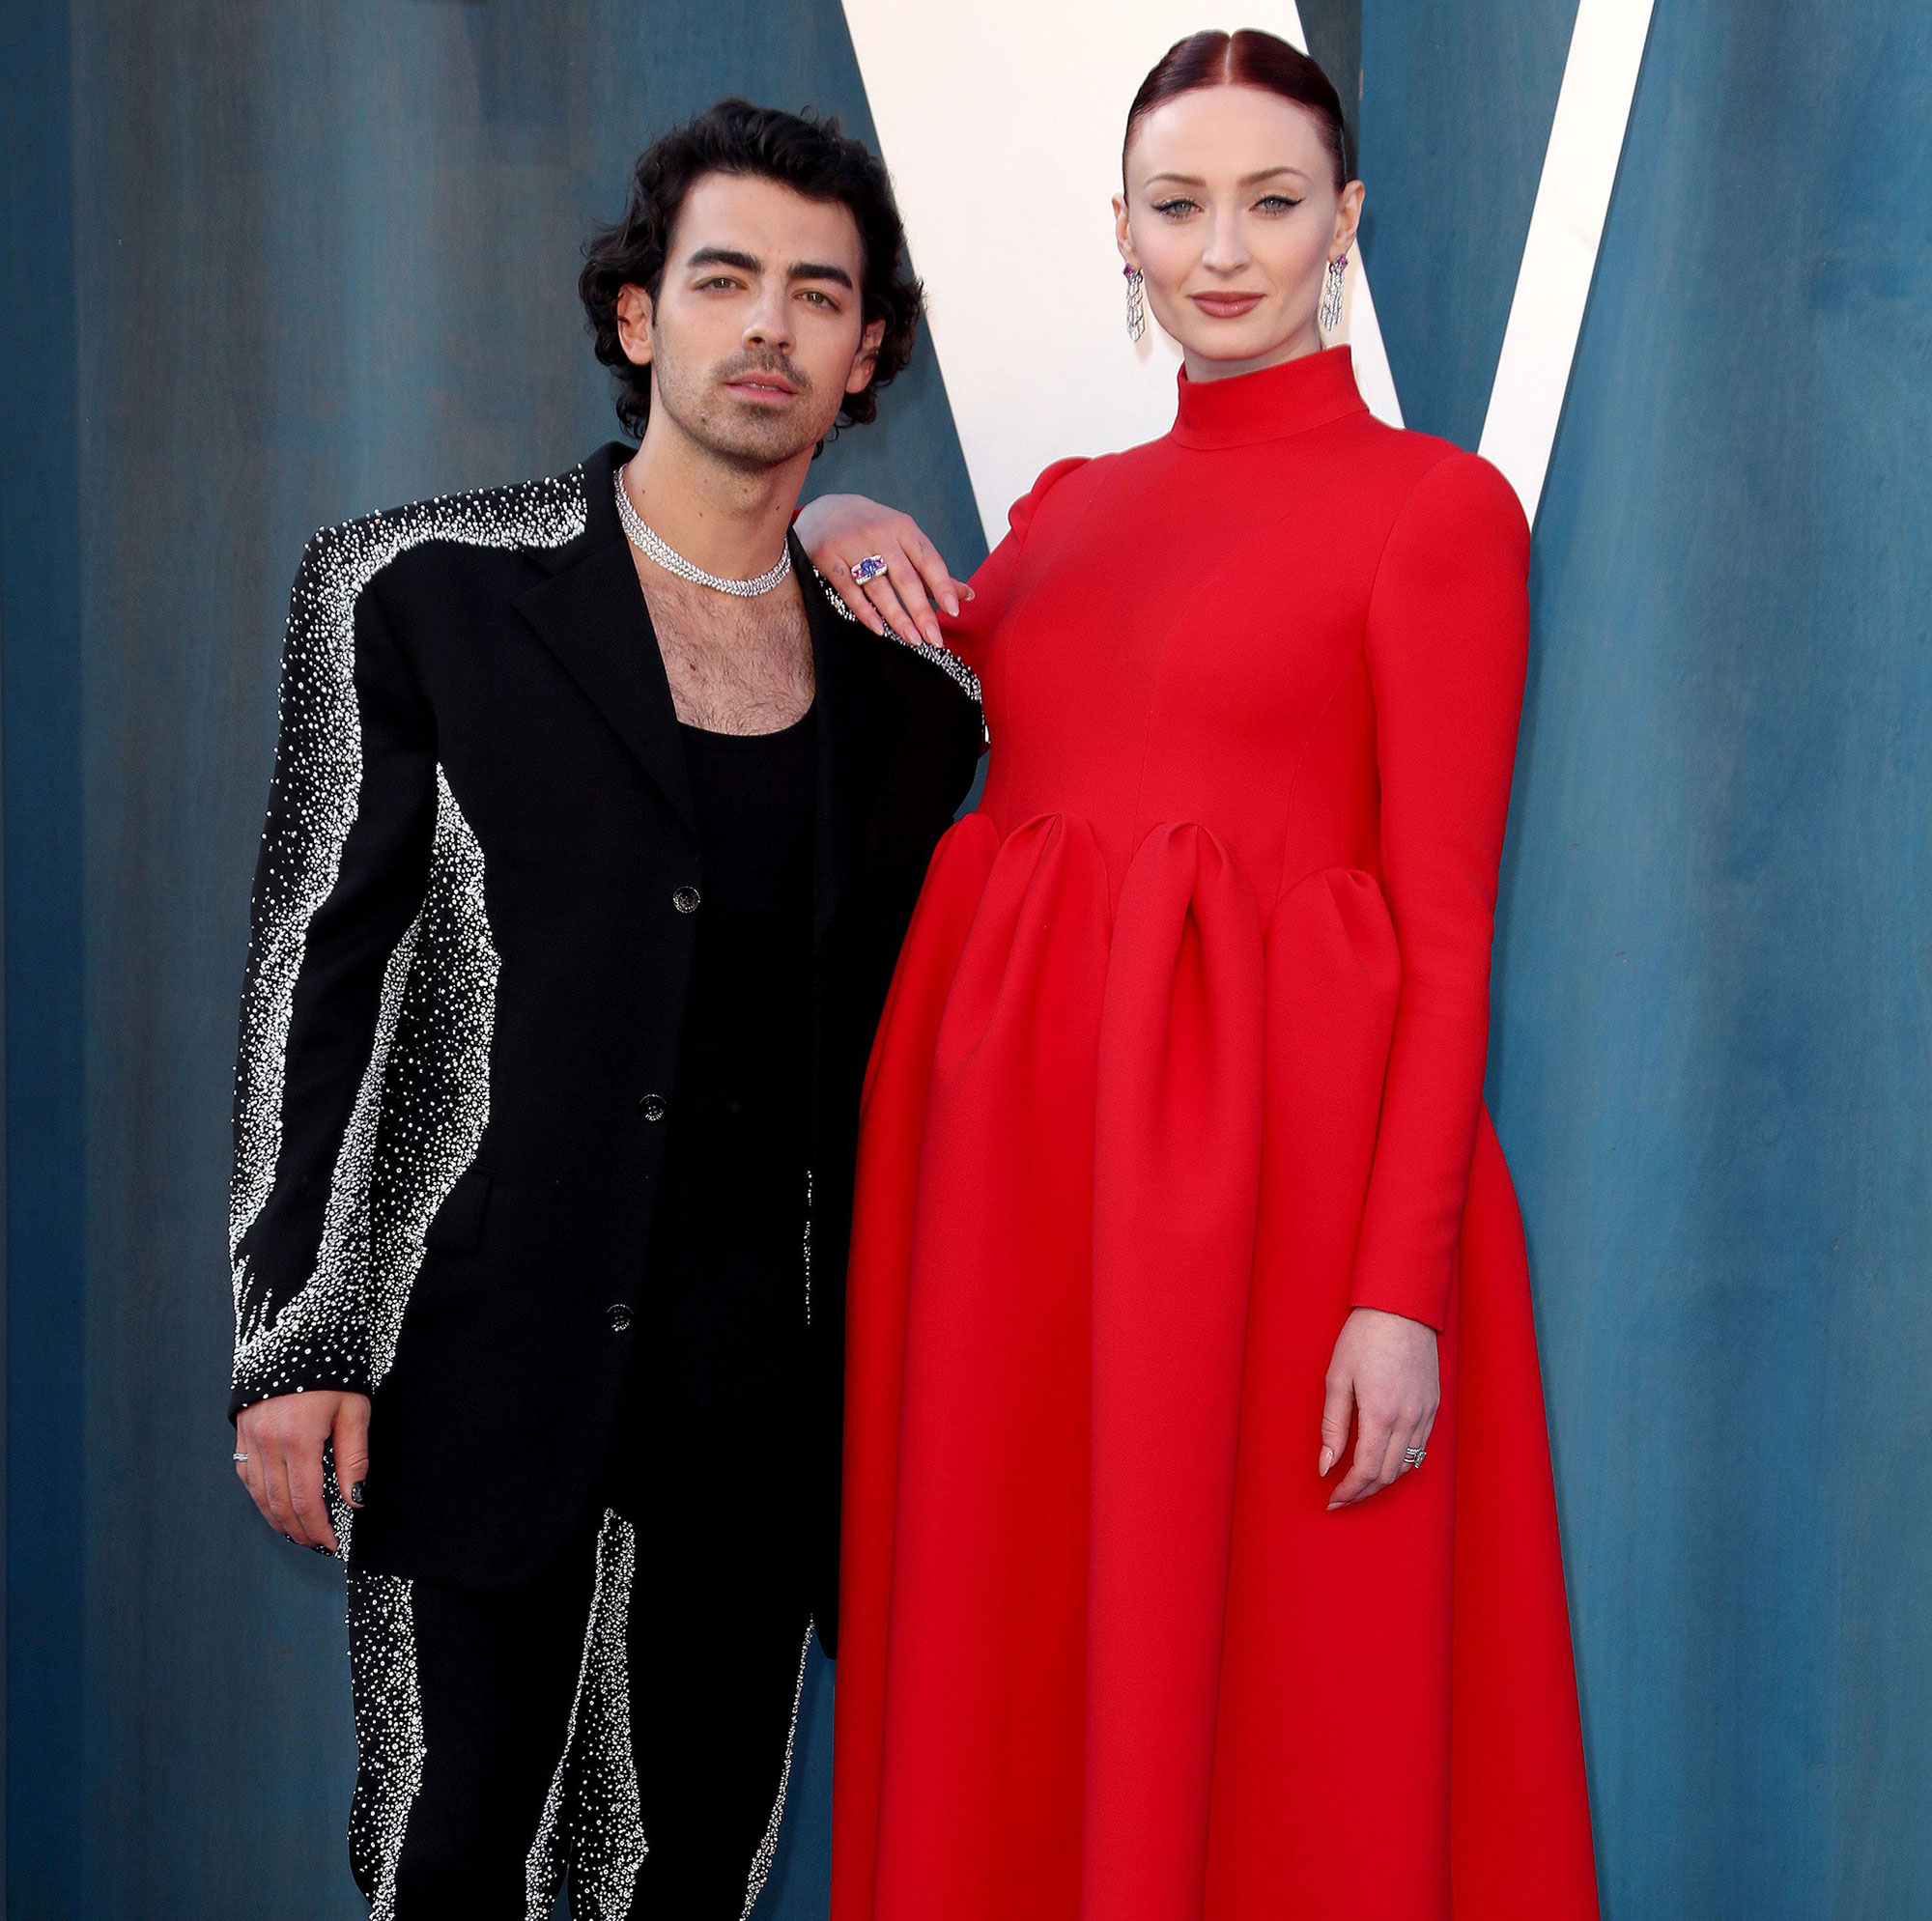 Joe Jonas and Sophie Turner Confirm The Birth of Their Baby Girl Willa